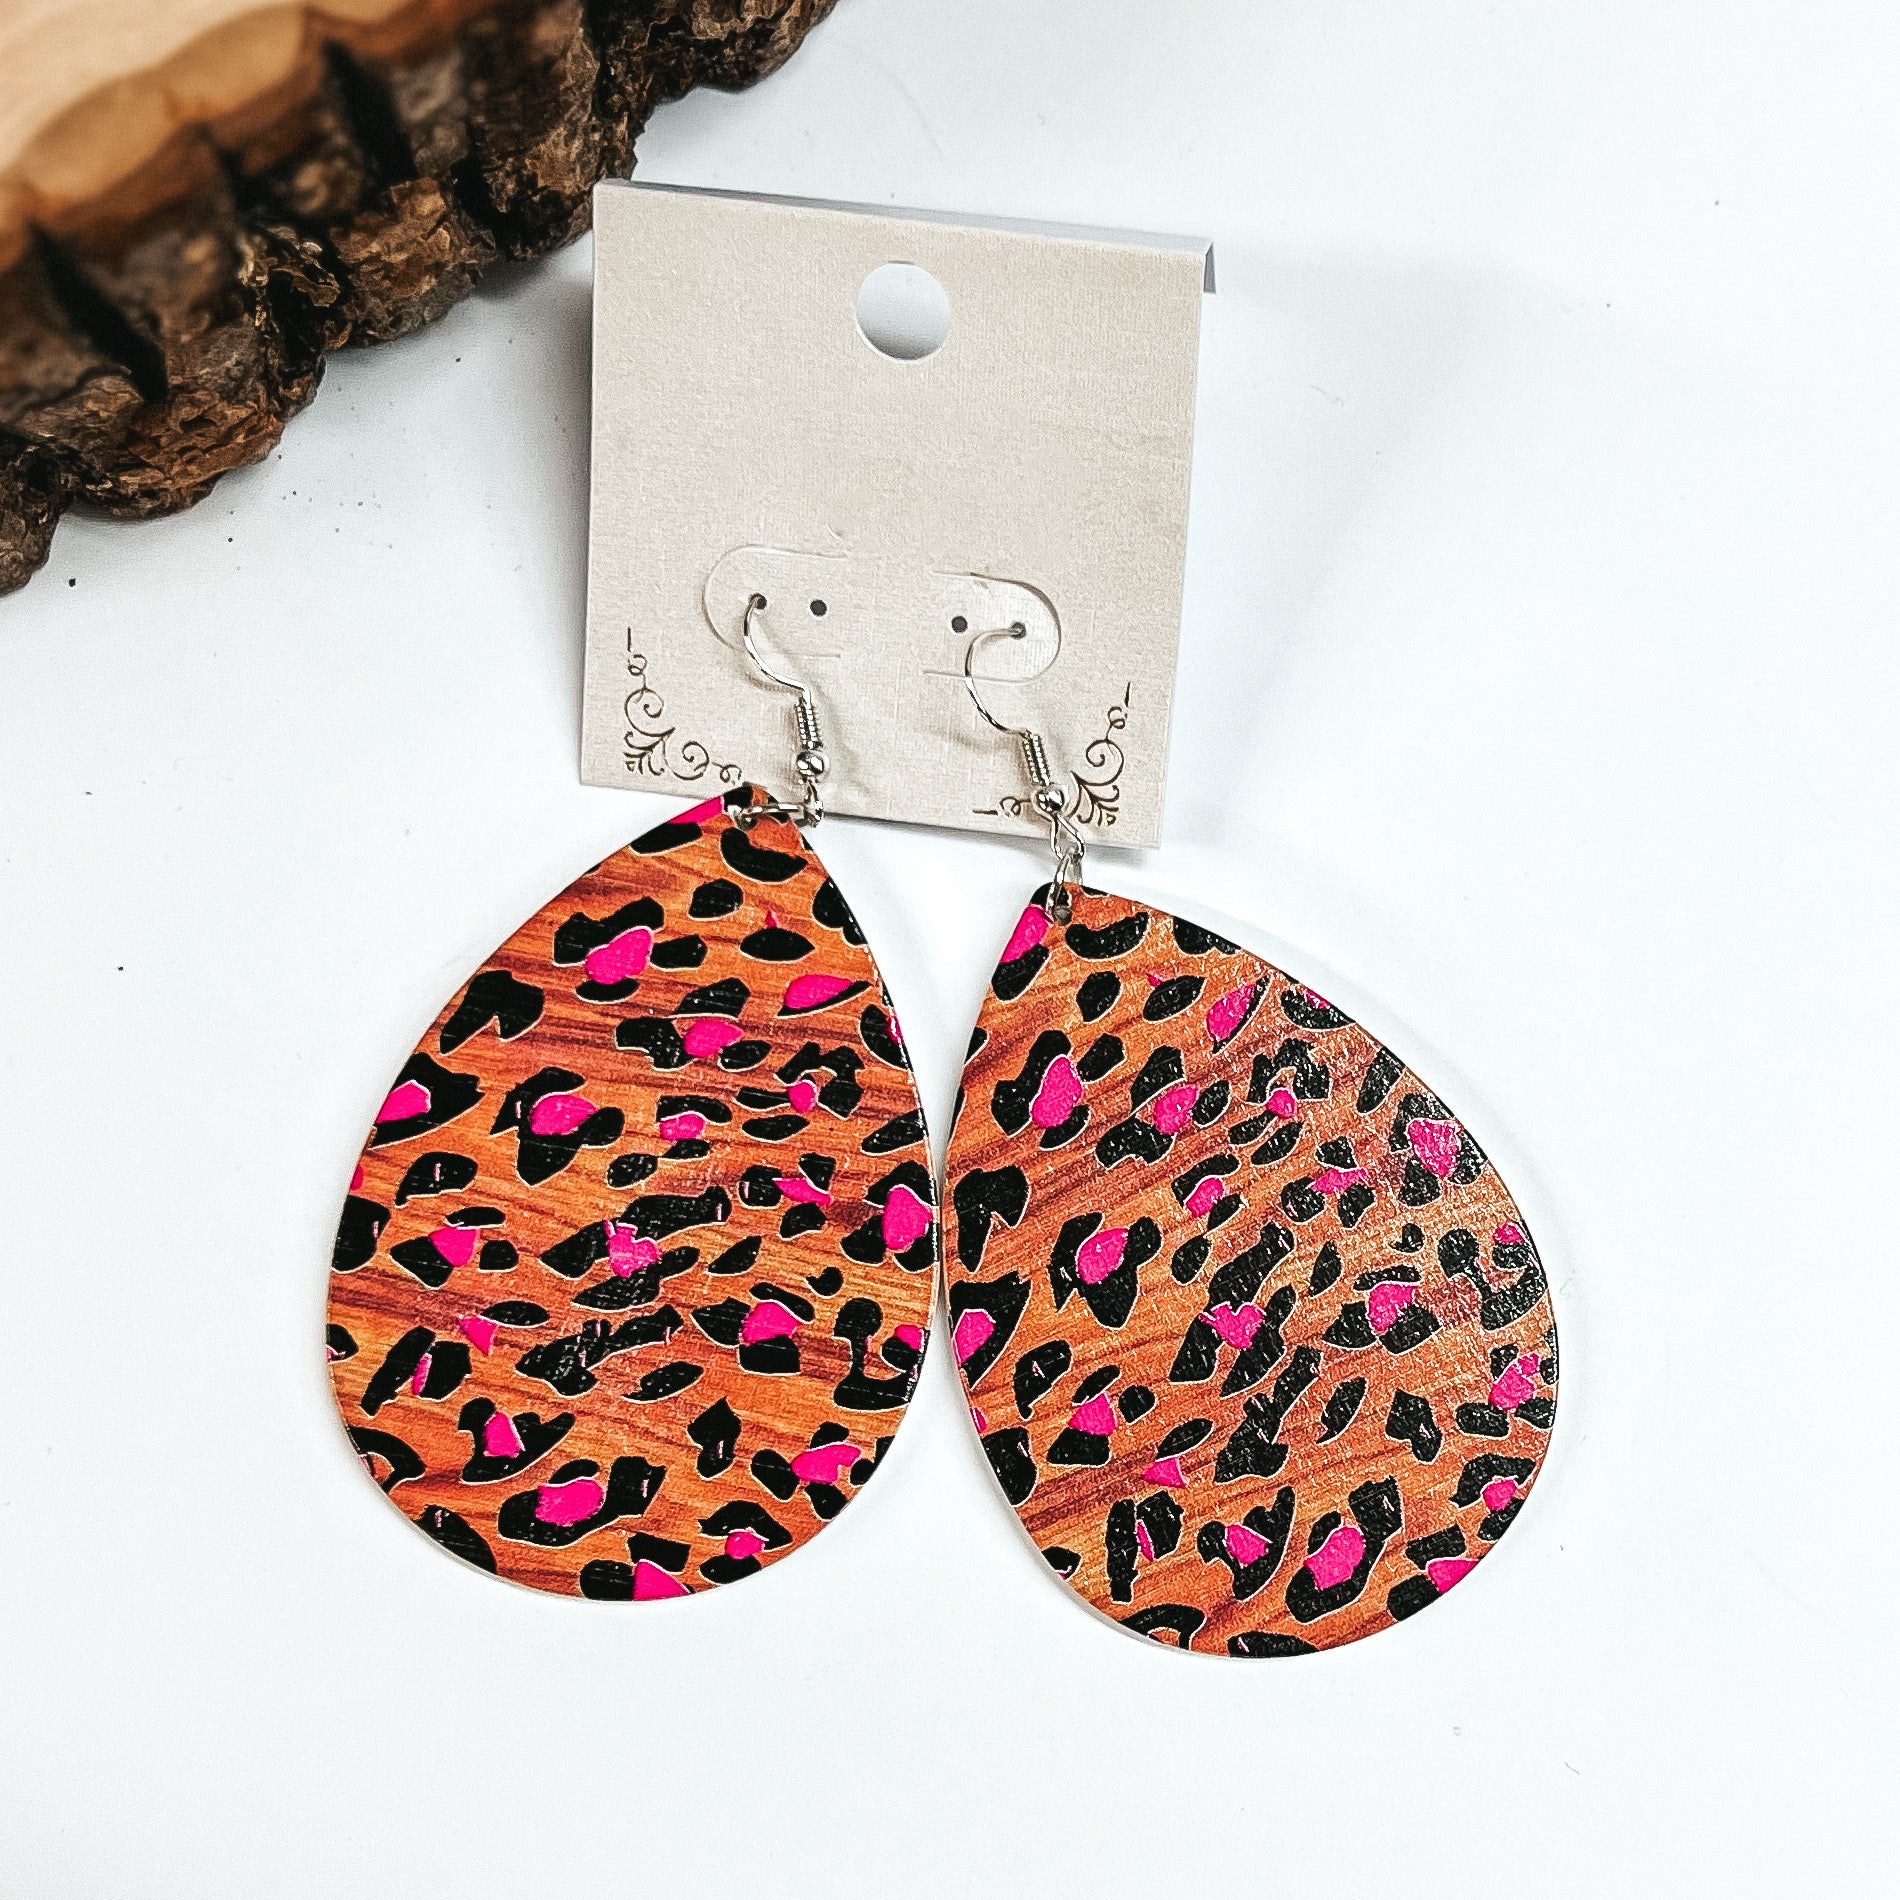 These are brown wooden teardrop earrings in leopard print and pink detailing. These earrings are placed on a white earring card holder, they are laying on a  white background with a slab of wood in the back as decor.